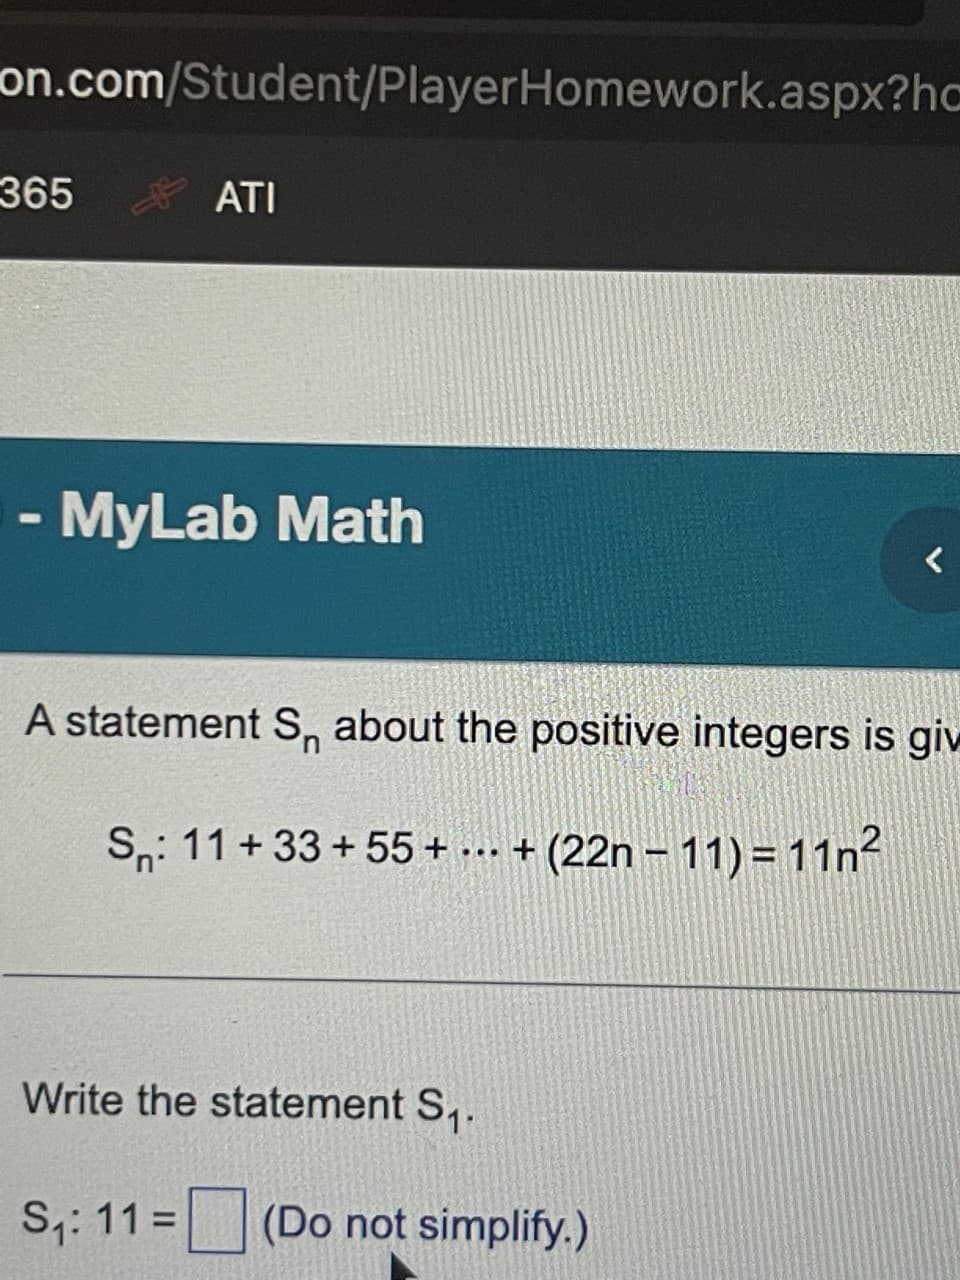 on.com/Student/PlayerHomework.aspx?hc
365
ATI
- MyLab Math
A statement S about the positive integers is giv
Sn: 11 +33 +55+ ... + (22n-11) = 11n²
Write the statement S₁.
S₁: 11= (Do not simplify.)